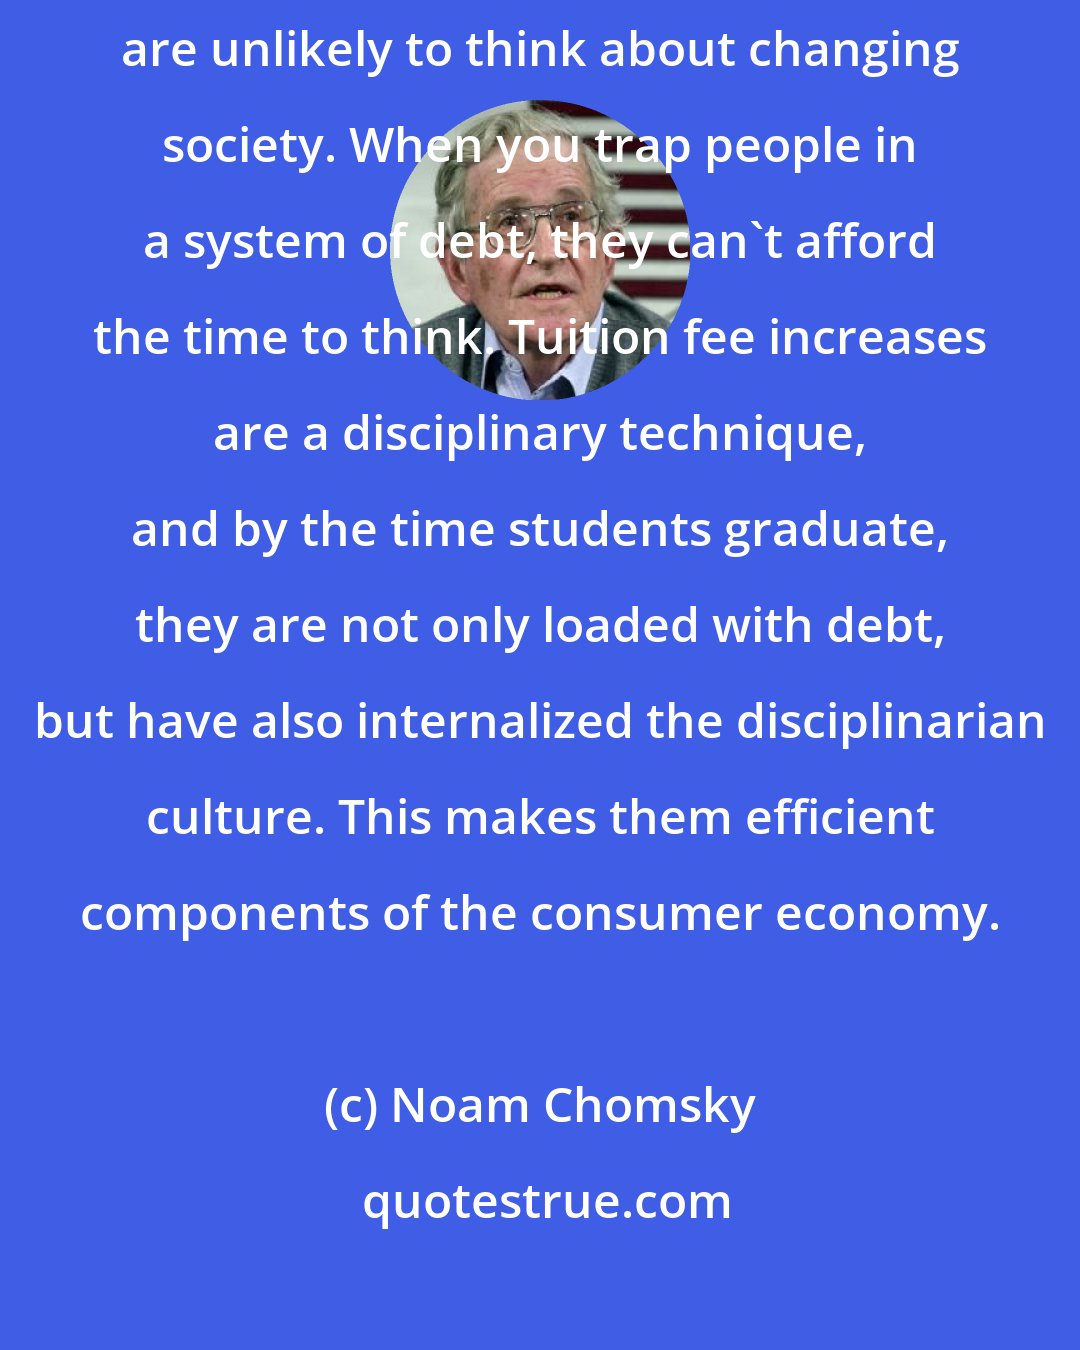 Noam Chomsky: Students who acquire large debts putting themselves through school are unlikely to think about changing society. When you trap people in a system of debt, they can't afford the time to think. Tuition fee increases are a disciplinary technique, and by the time students graduate, they are not only loaded with debt, but have also internalized the disciplinarian culture. This makes them efficient components of the consumer economy.